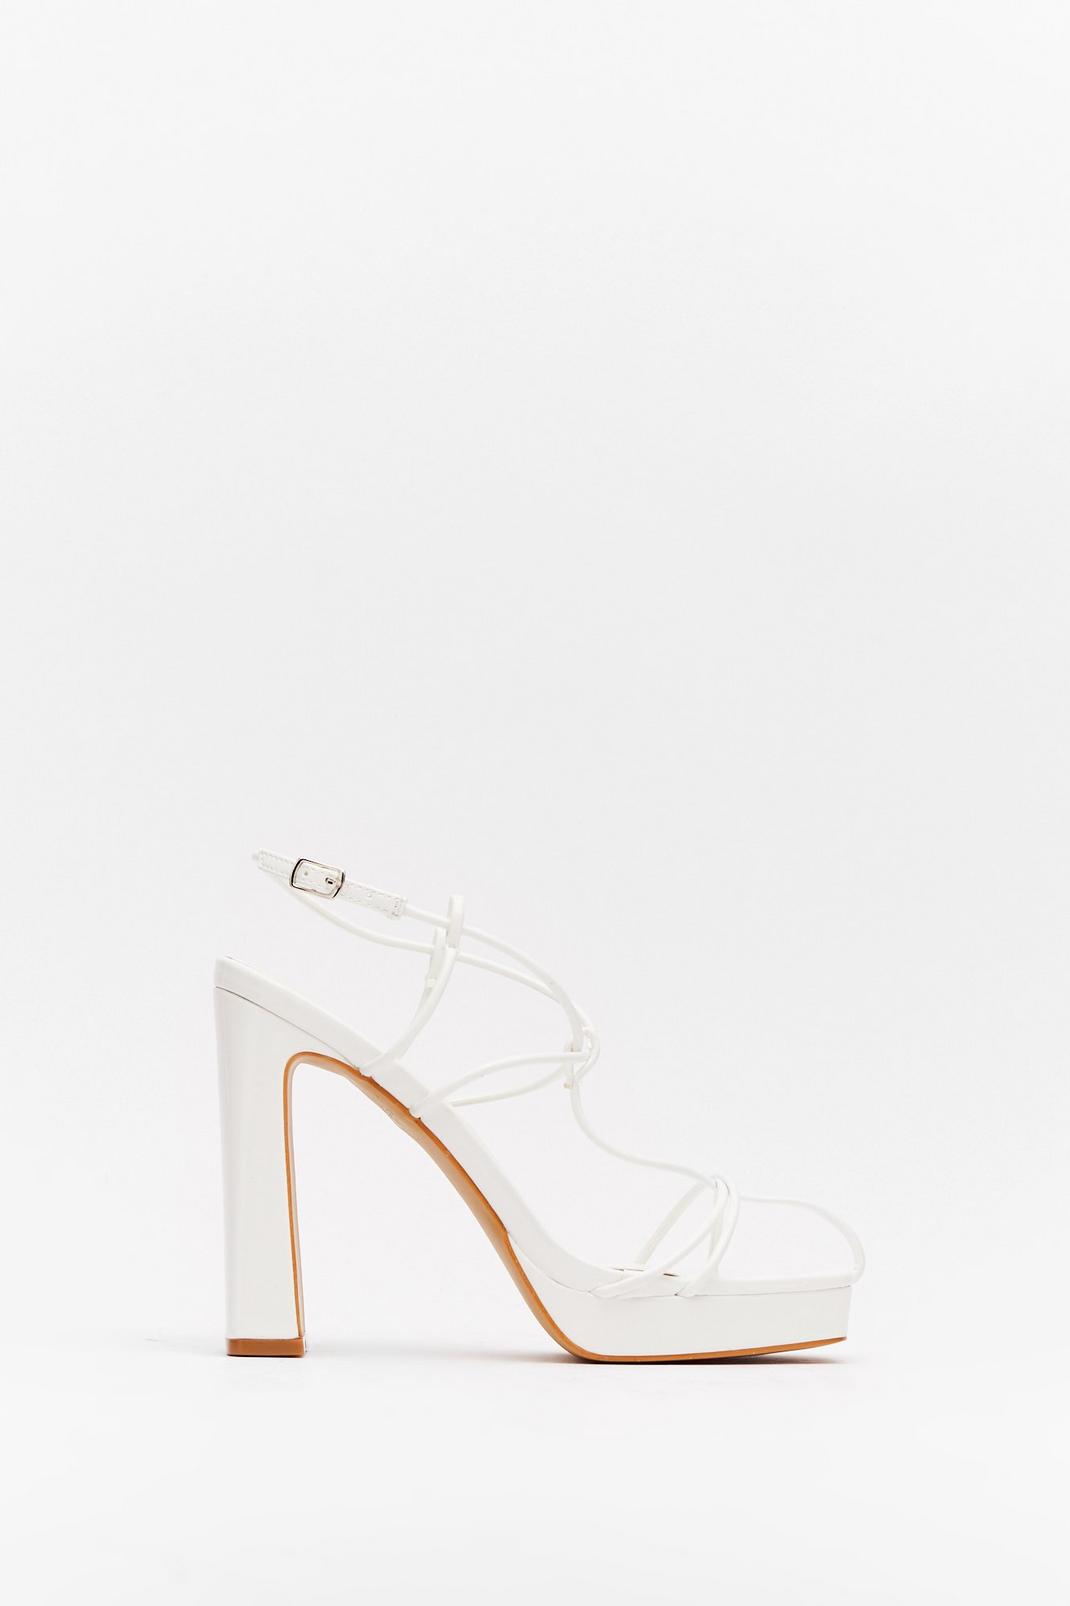 Strappy to Know You Faux Leather Platform Heels | Nasty Gal